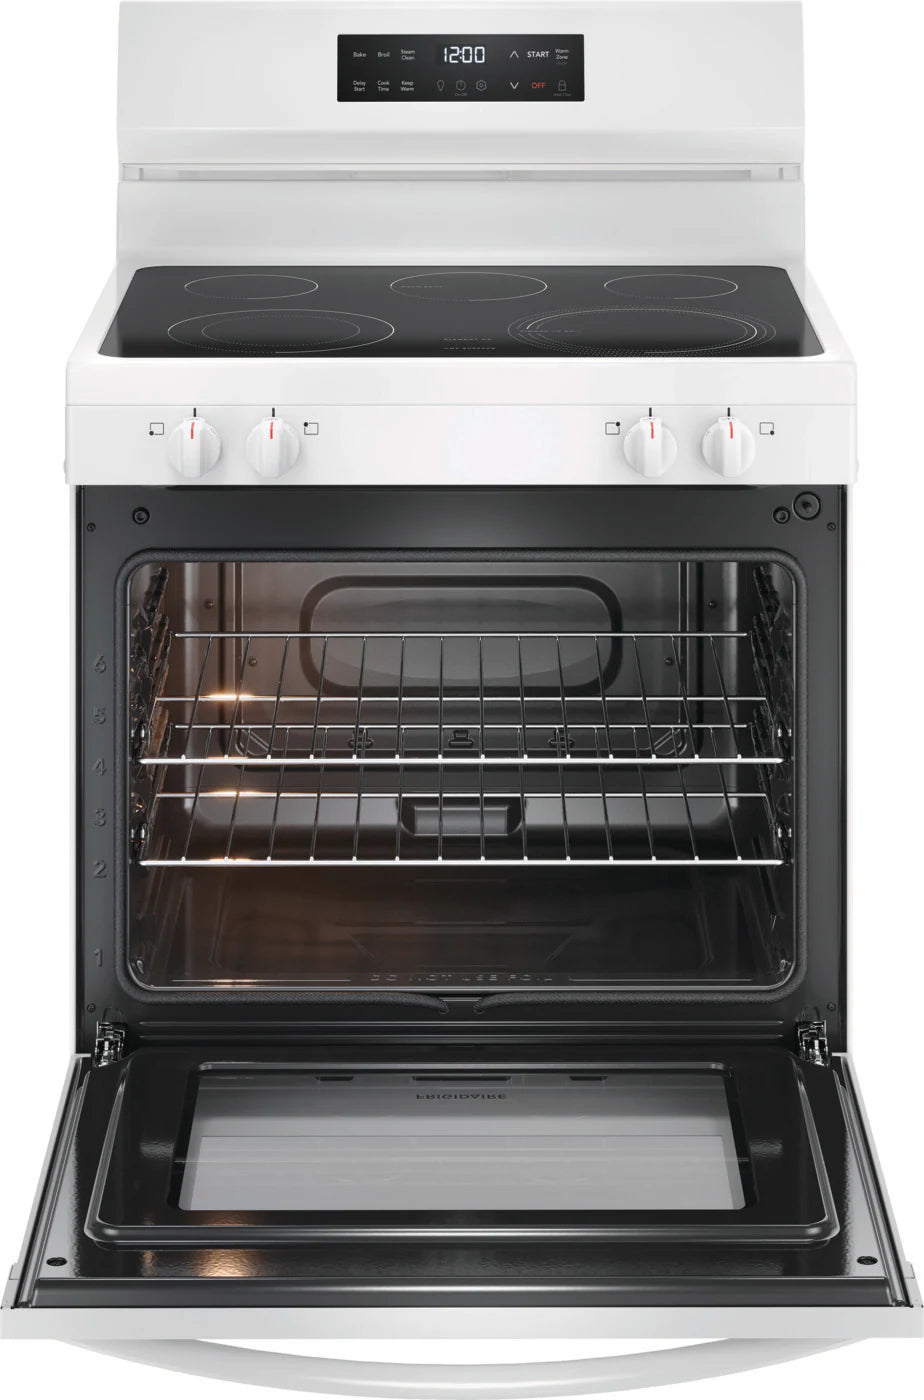 Frigidaire - 5.3 cu. ft  Electric Range in White - FCRE306CAW